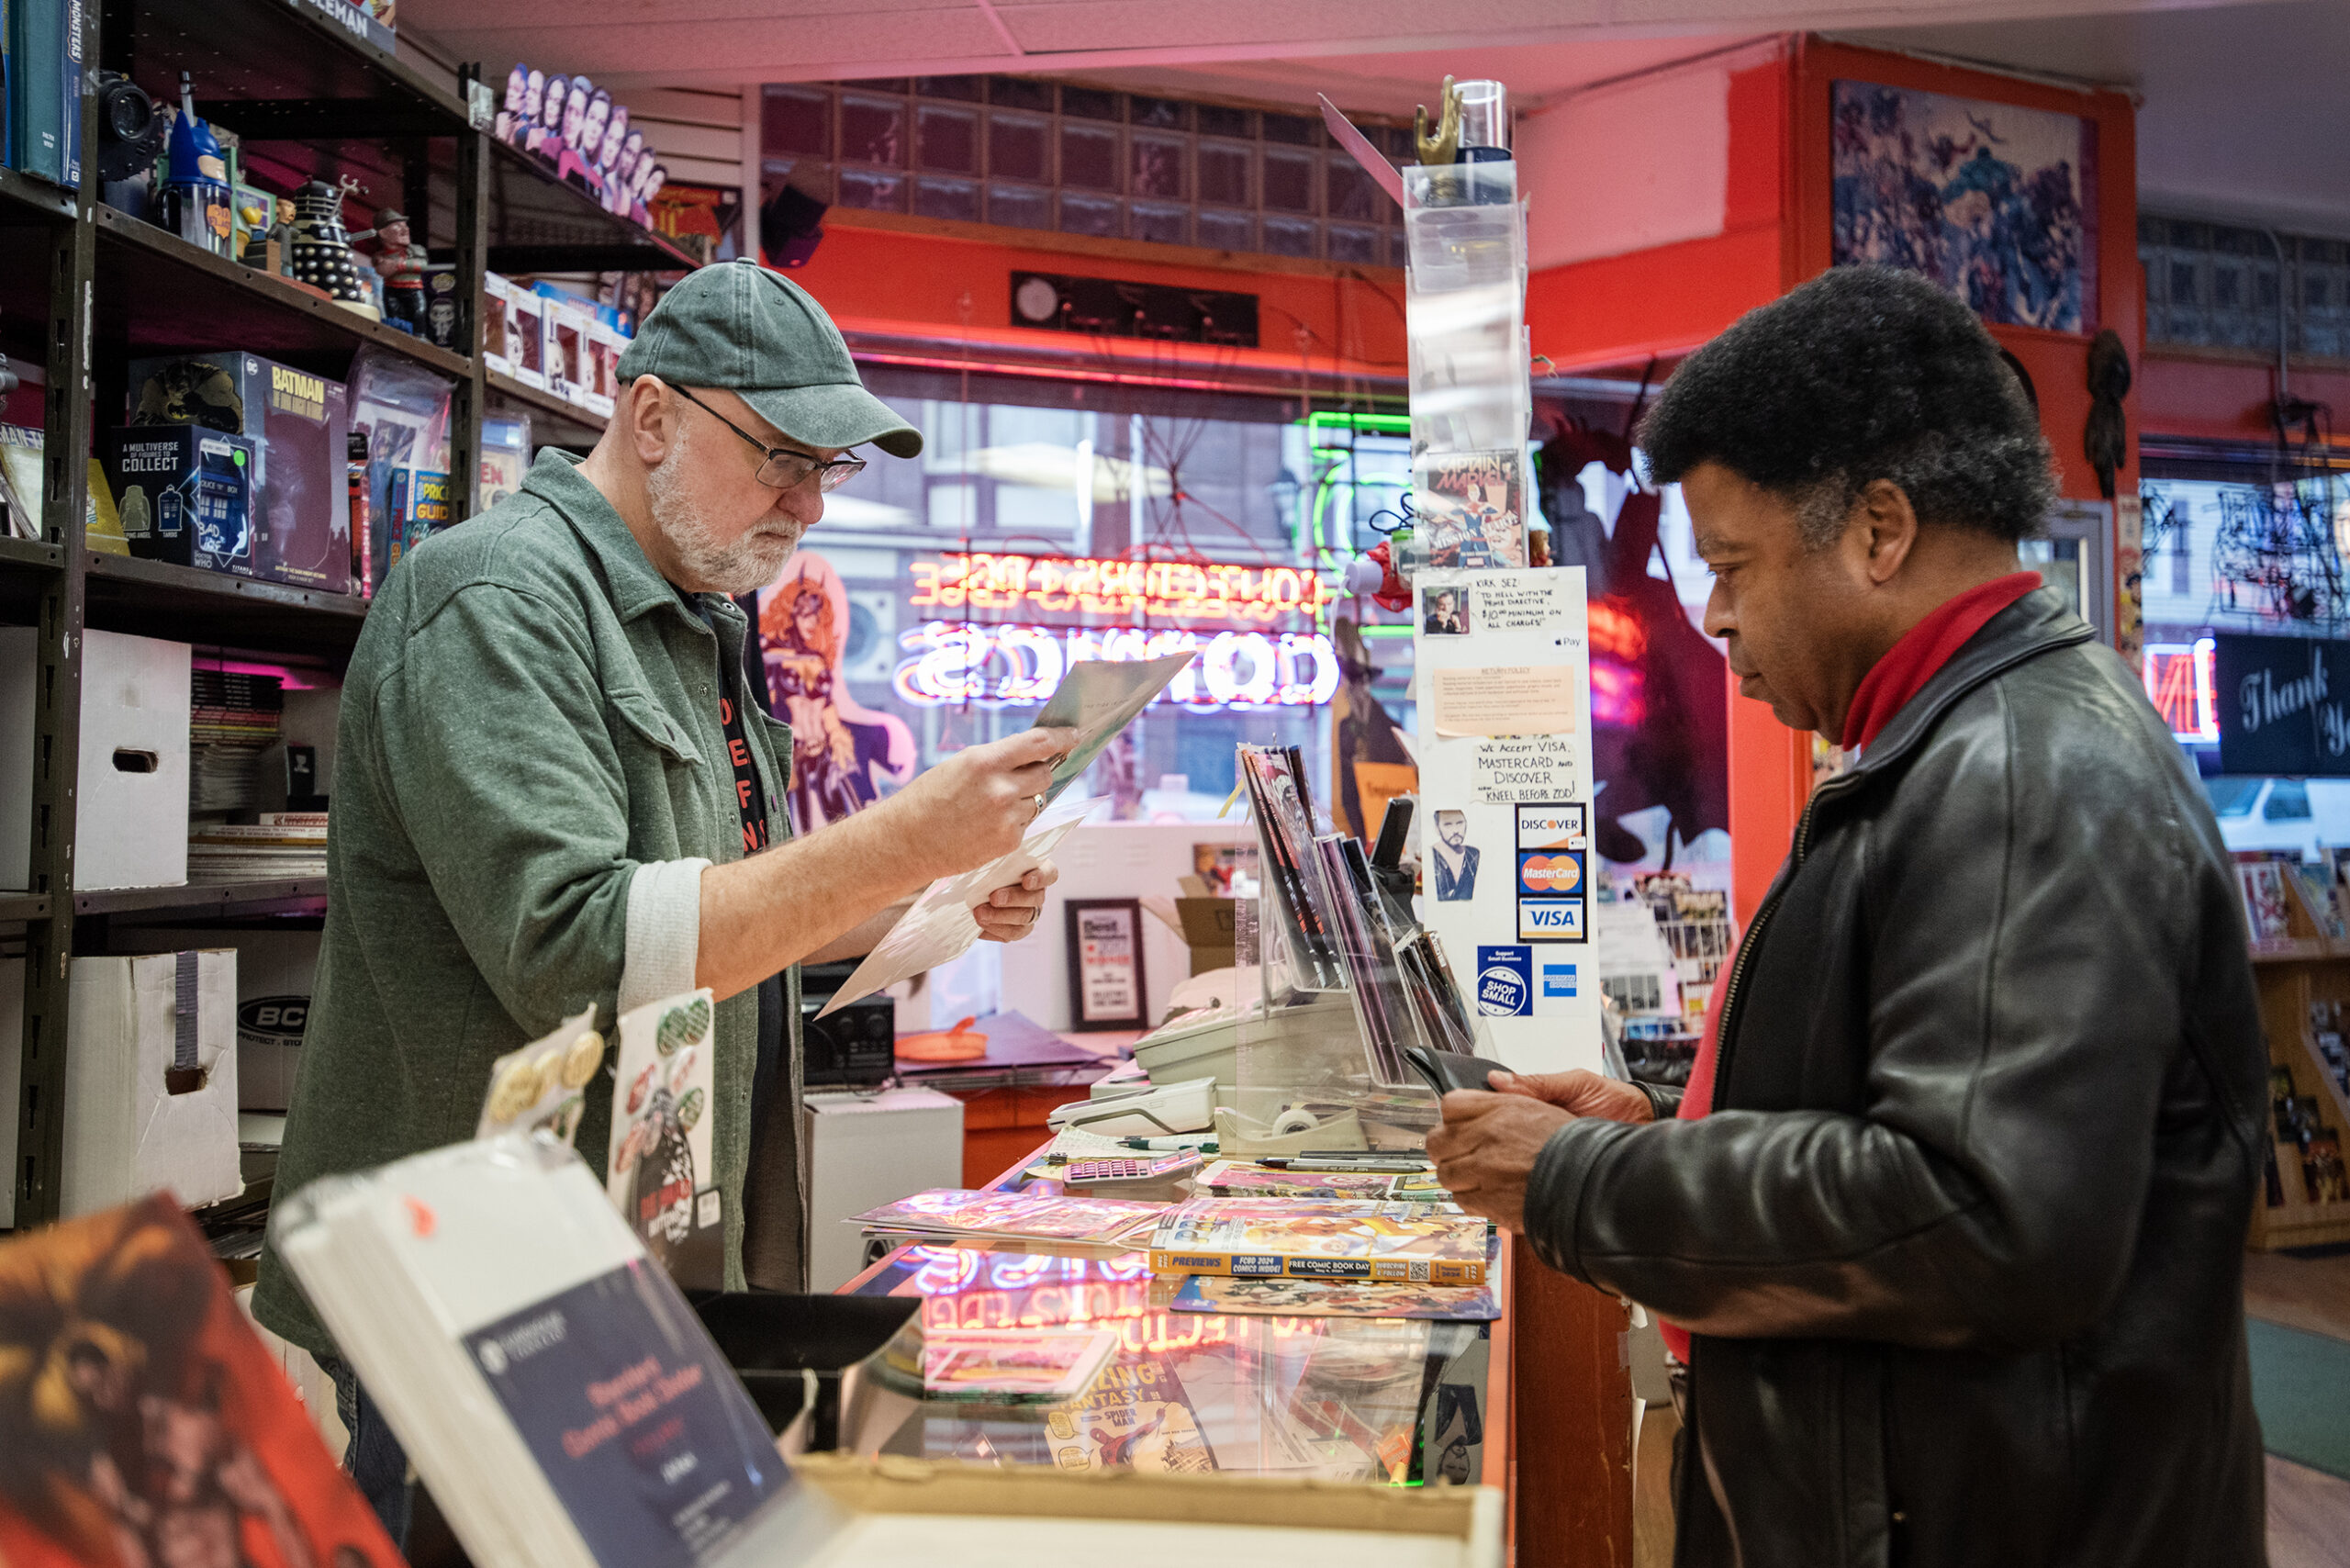 A man holds a comic book as he checks out a customer at a store.